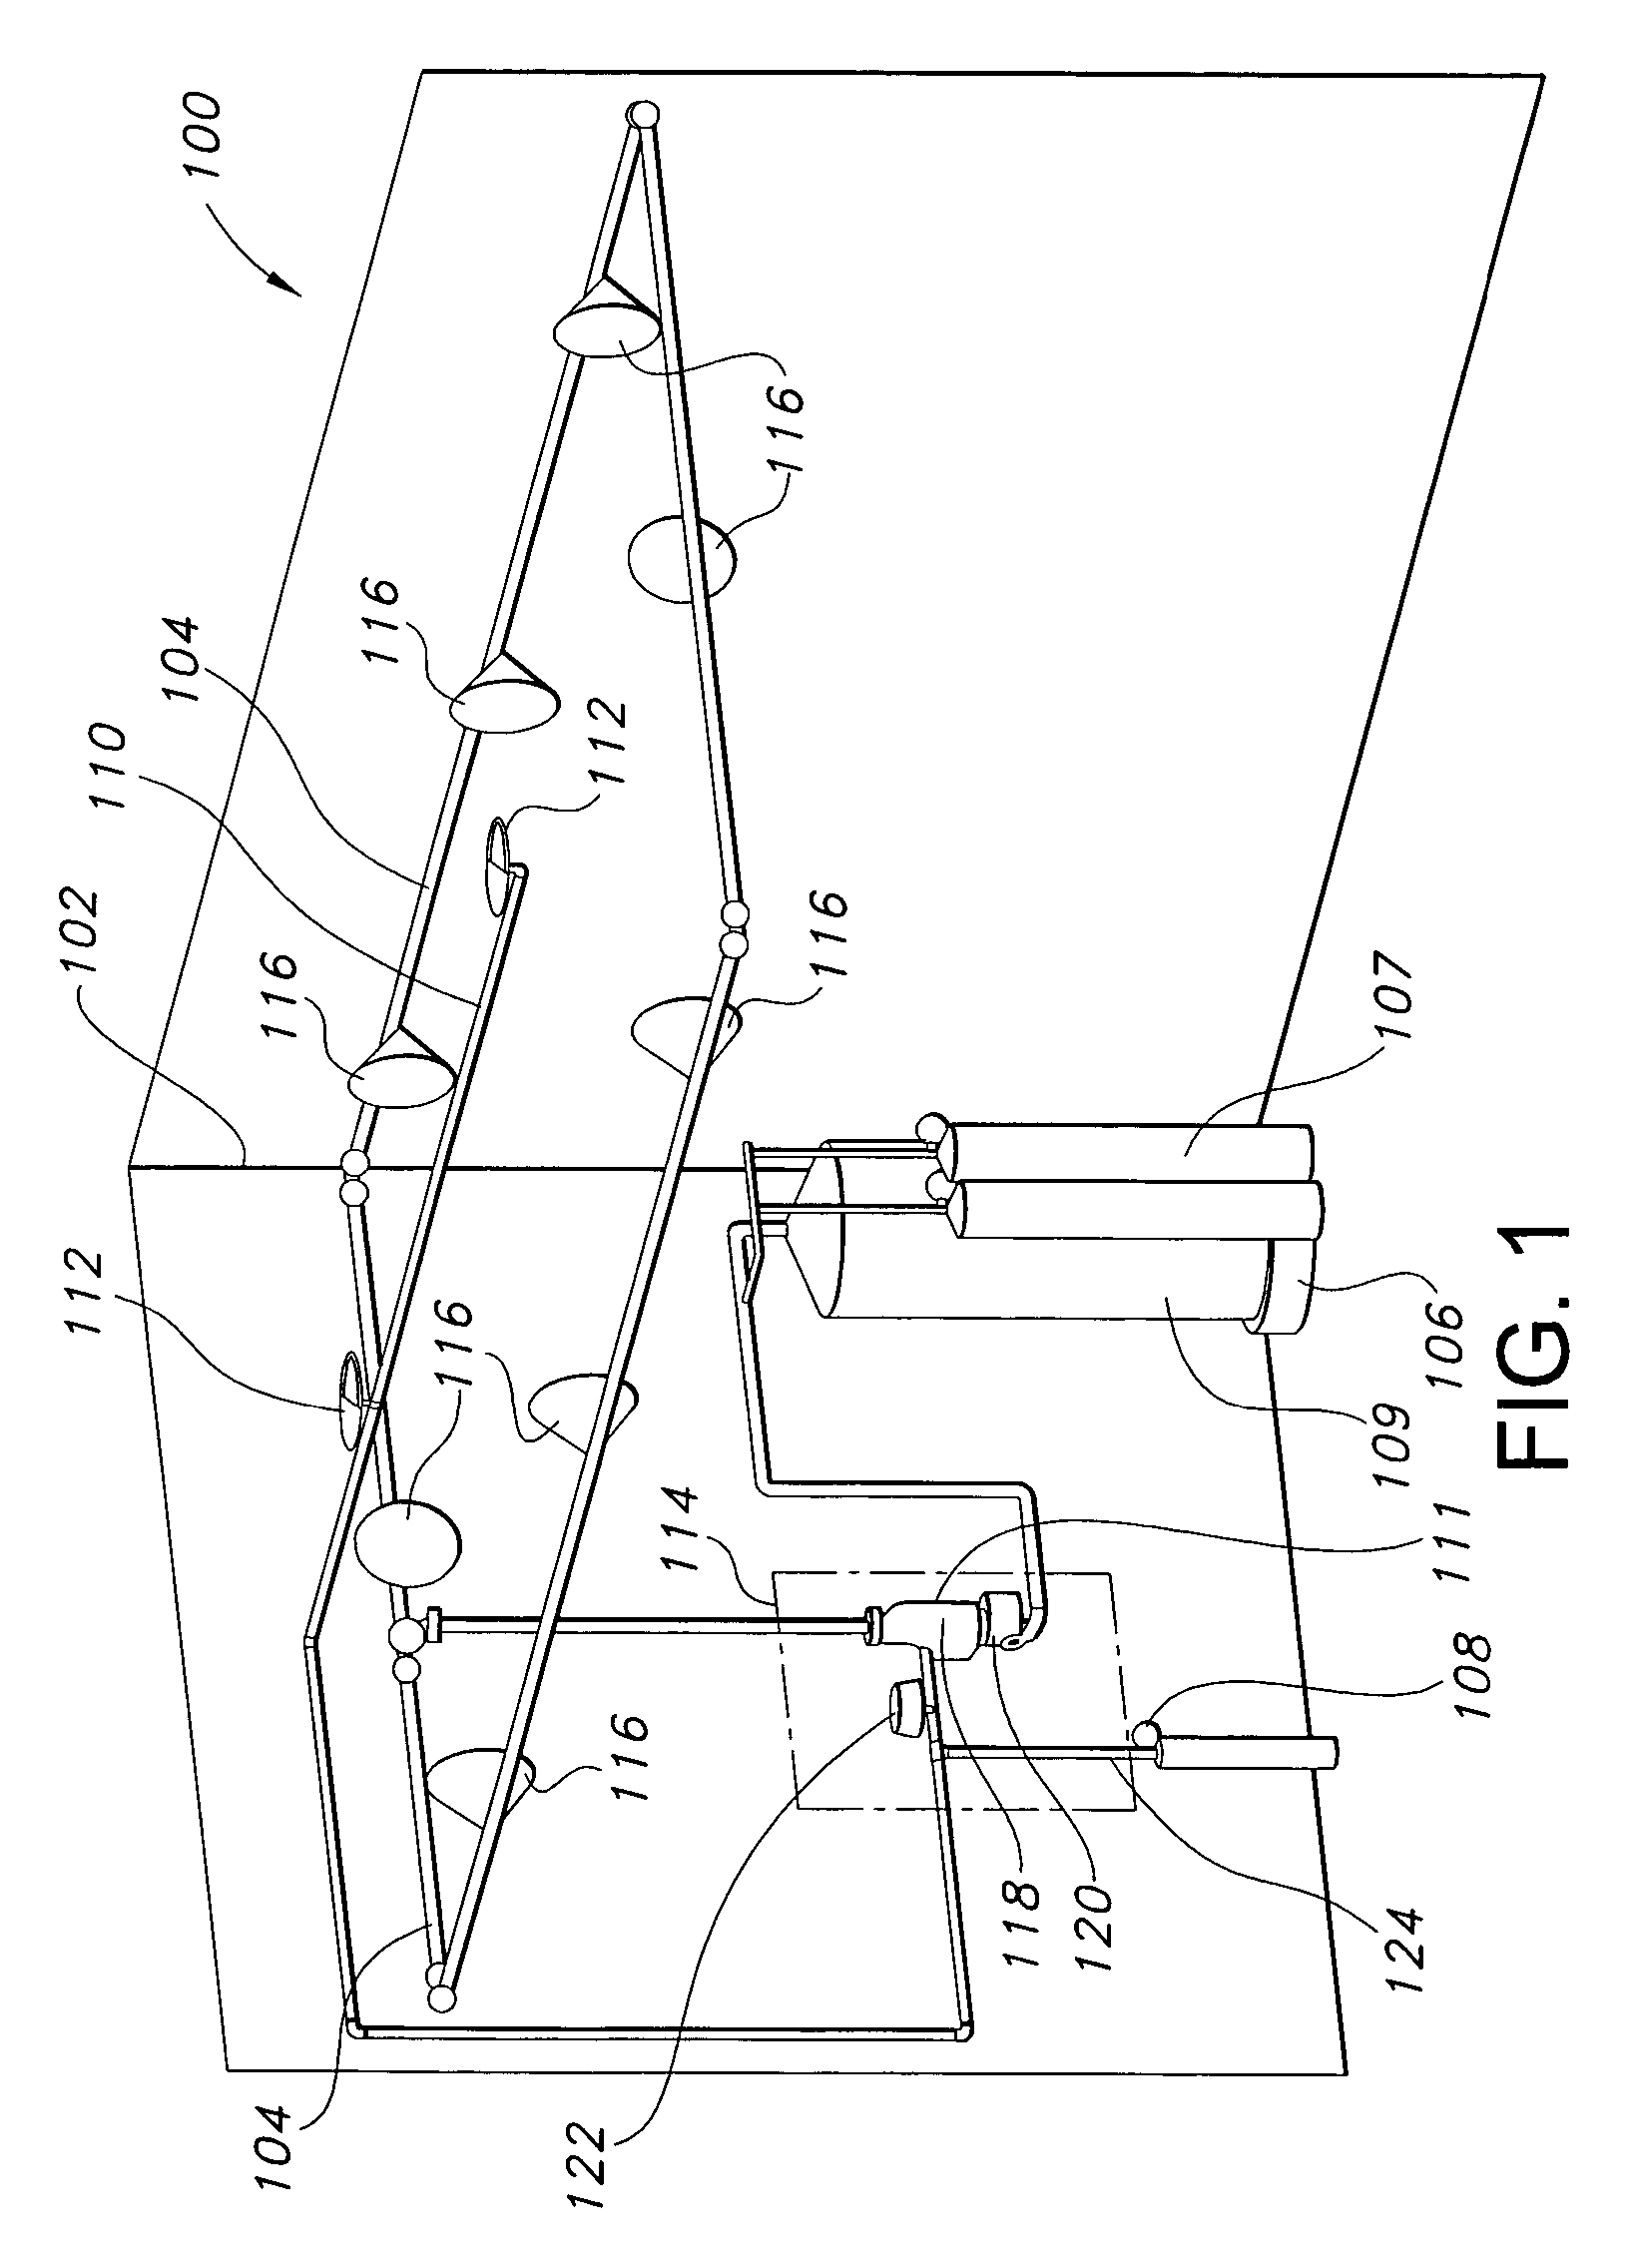 Fire suppression system